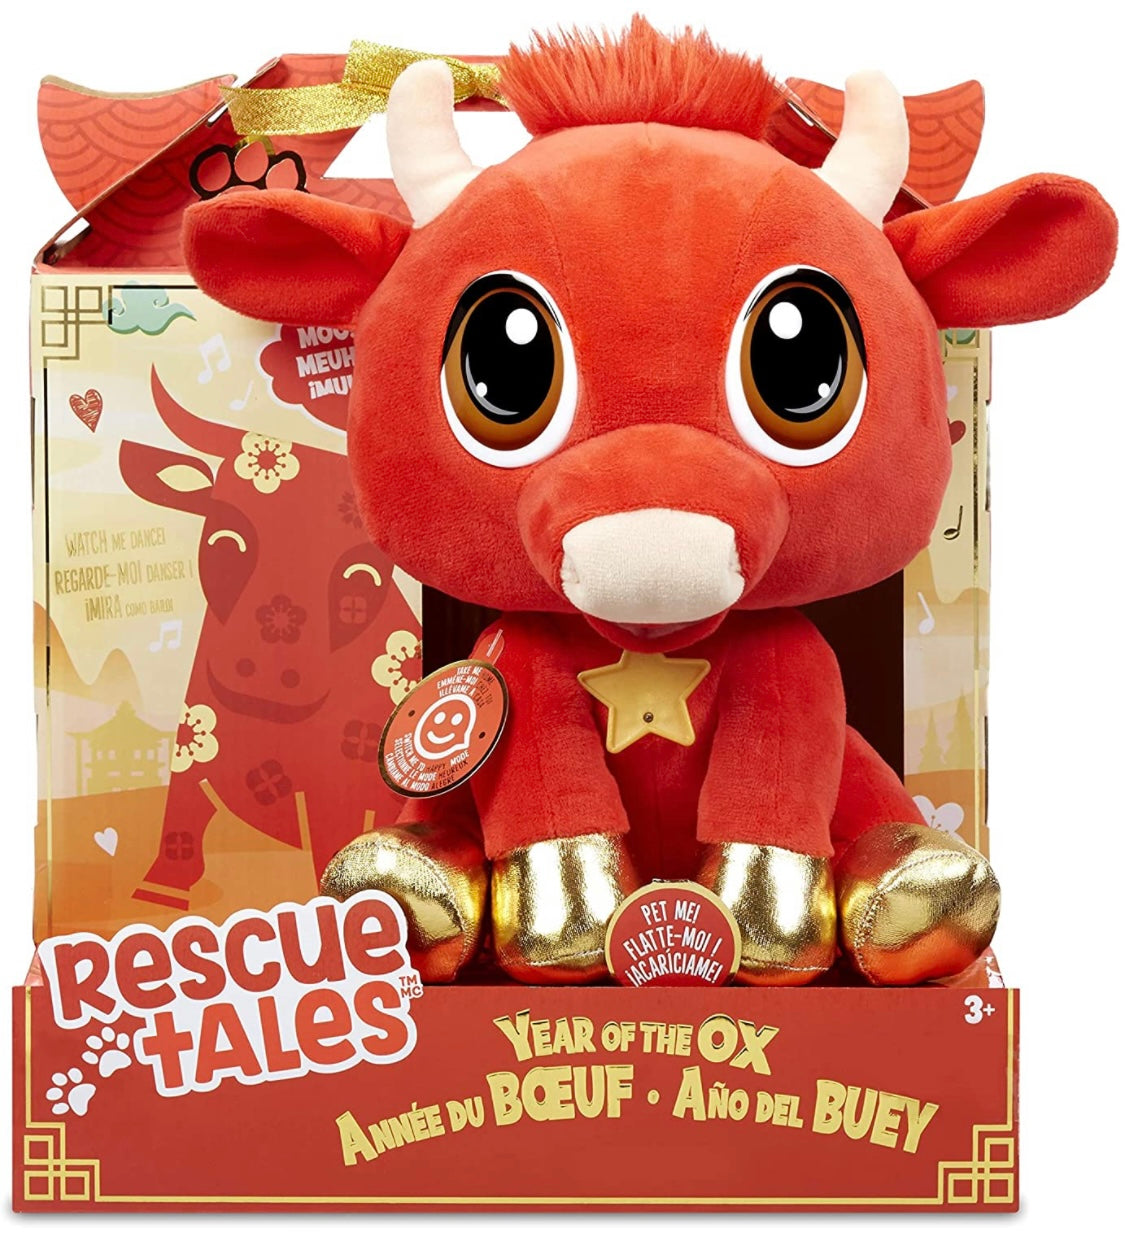 Rescue Tales Year of the Ox